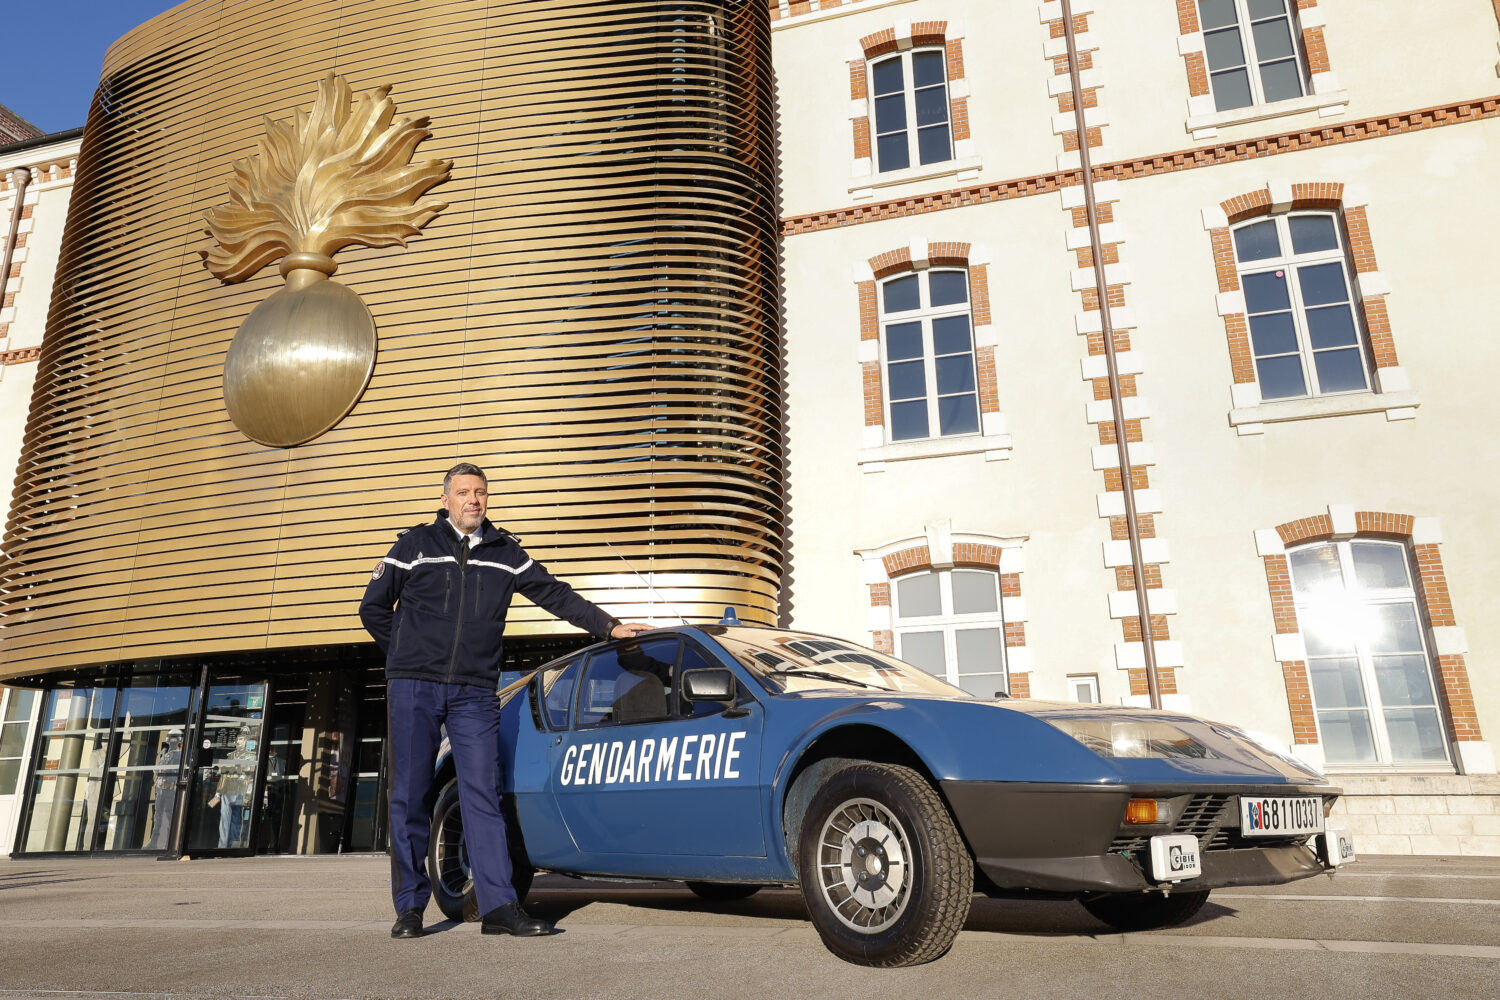 2022 - Story - The Alpine A110 and France’s Gendarmerie – Then and Now